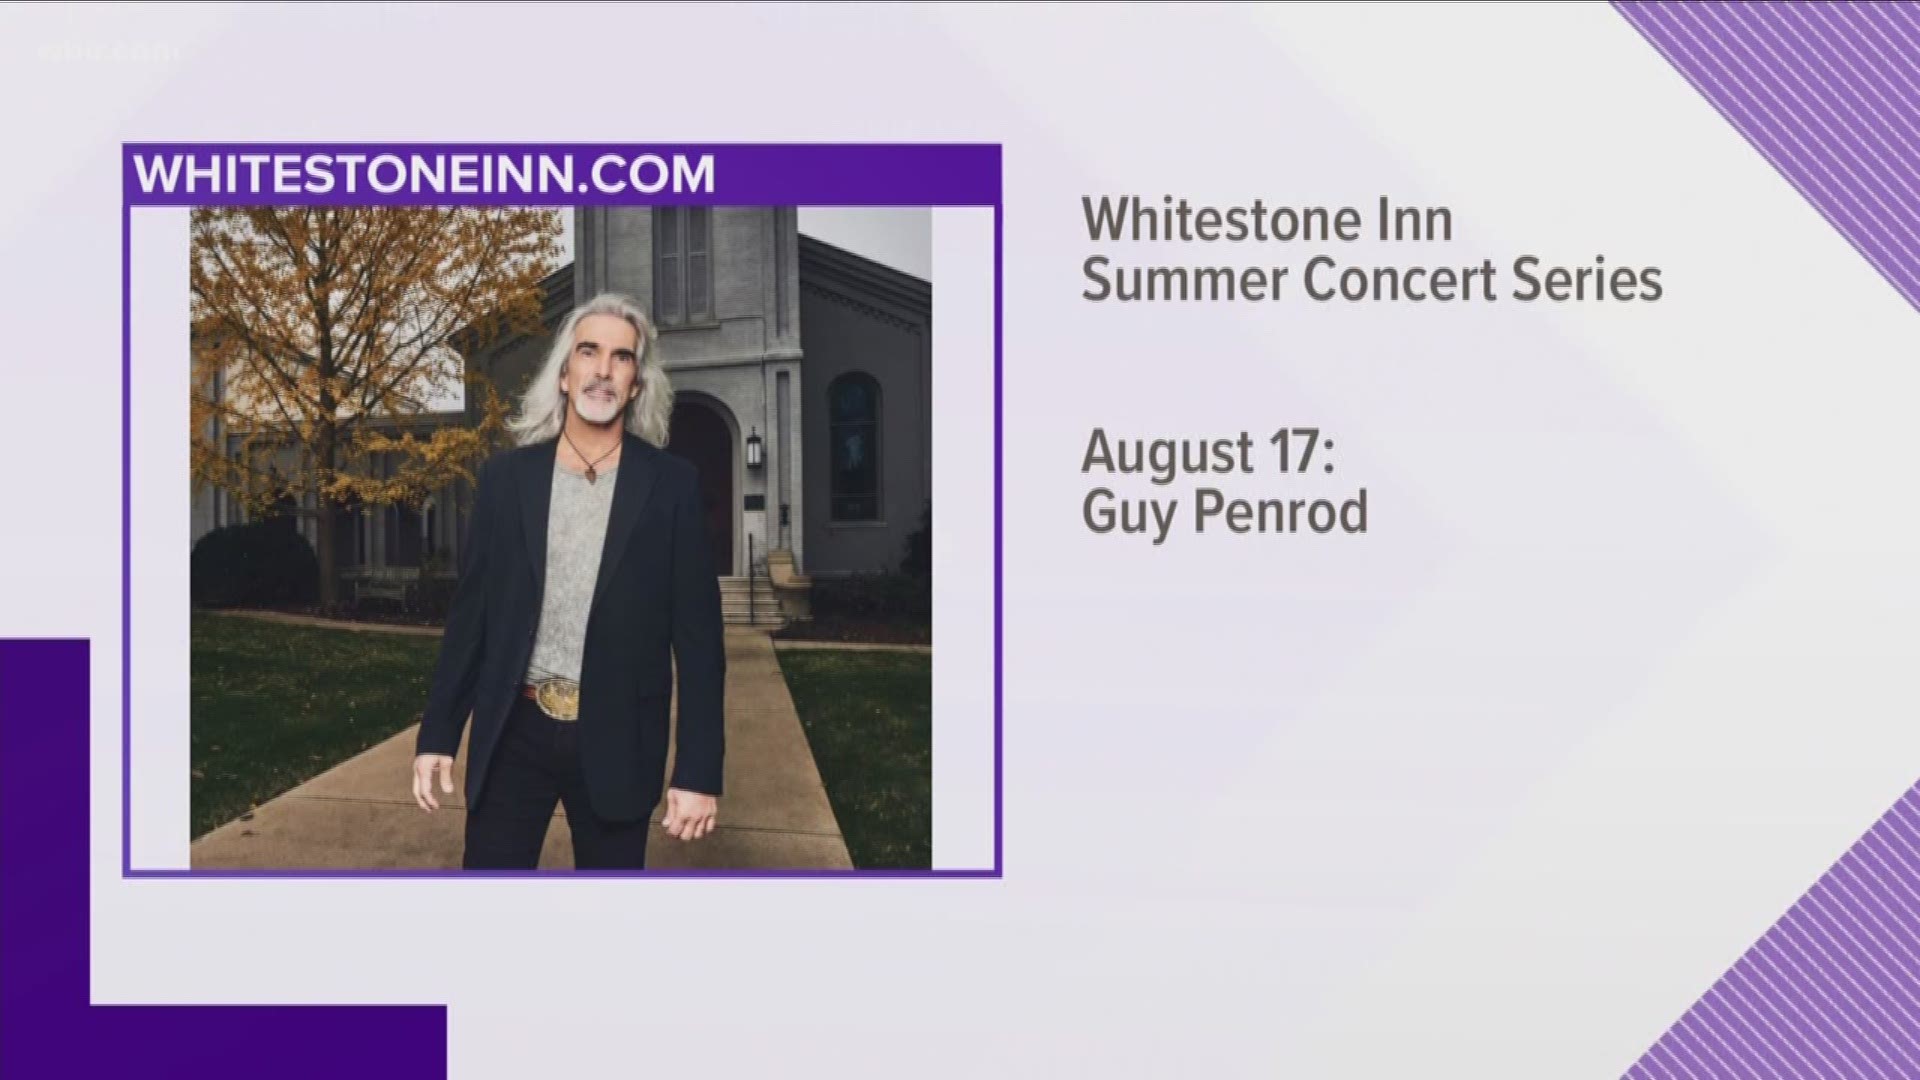 Whitestone Inn in Kingston will host their Summer Concert Series. Some of the acts include: Guy Penrod, Jeff & Sheri Easter, Adam Crabb, The Martin's, The Isaacs. Call (865) 376-0113 or visit whitestoneinn.com to learn more. July 15, 2019-4pm